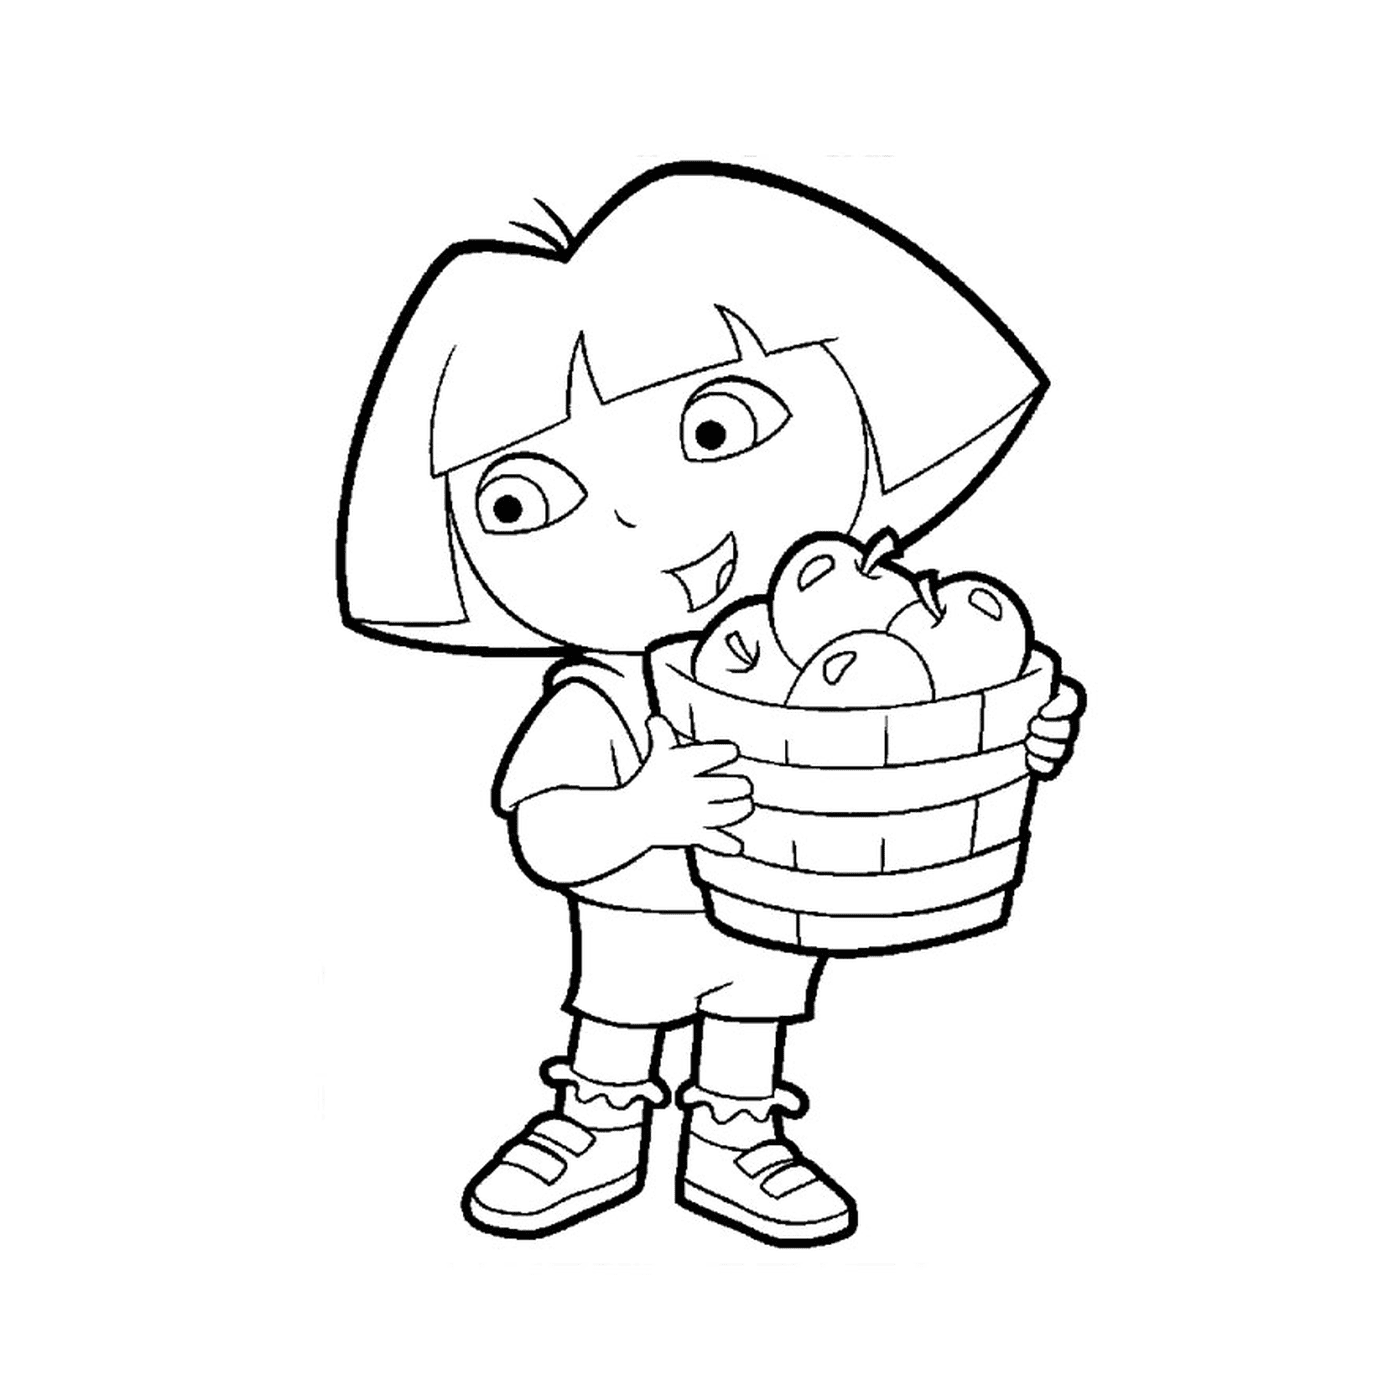  Dora holds a basket of apples in front of the television 